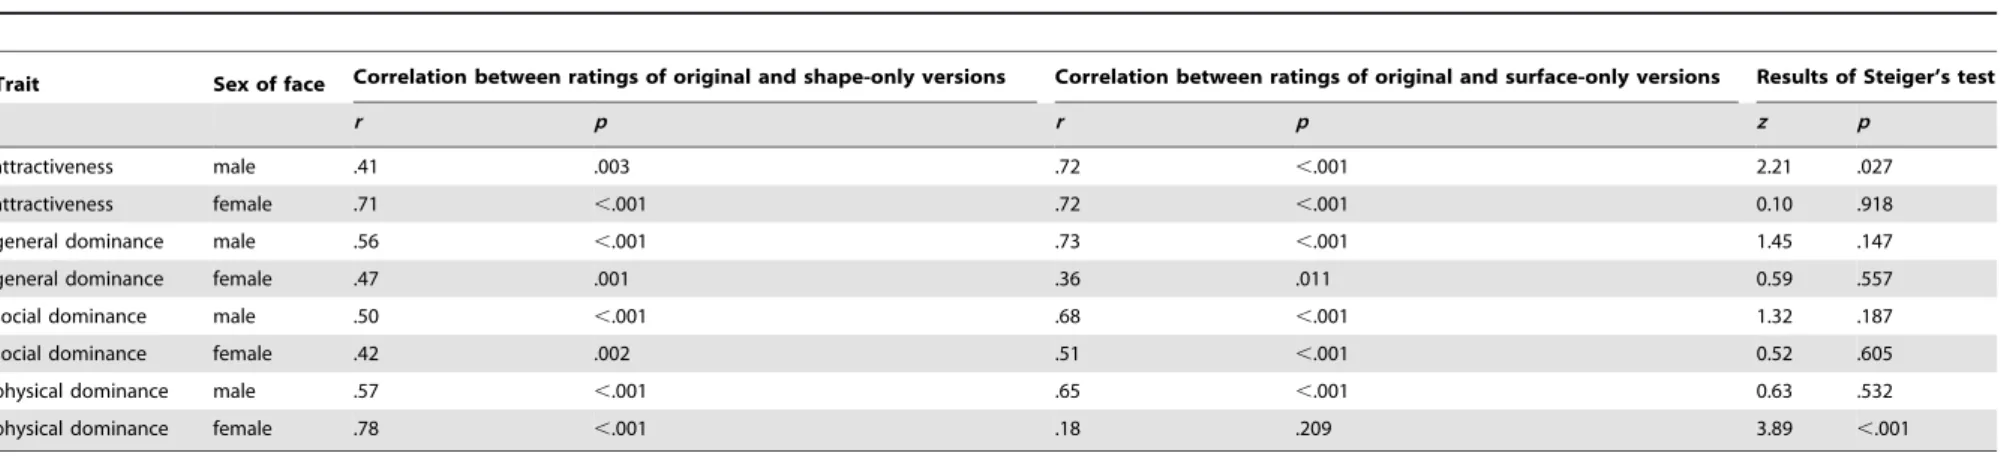 Table 3. Summary results of analyses testing for independent contributions of ratings of shape-only and surface-only versions of male and female faces.